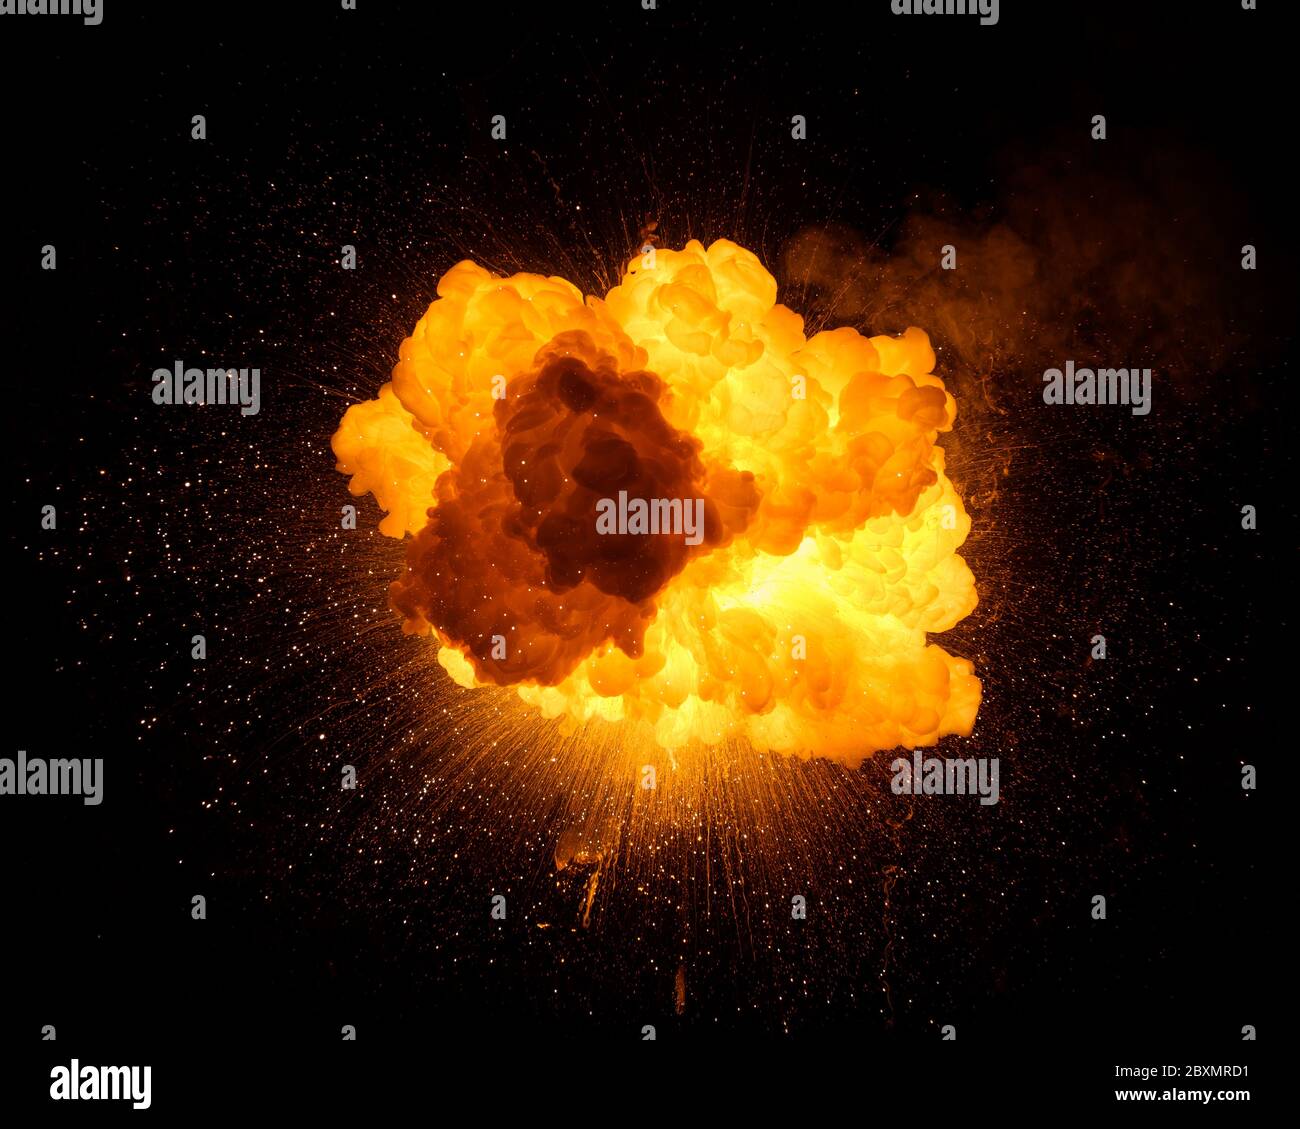 Fiery bomb explosion with sparks isolated on black background. Texture photography of fire and smoke. Stock Photo